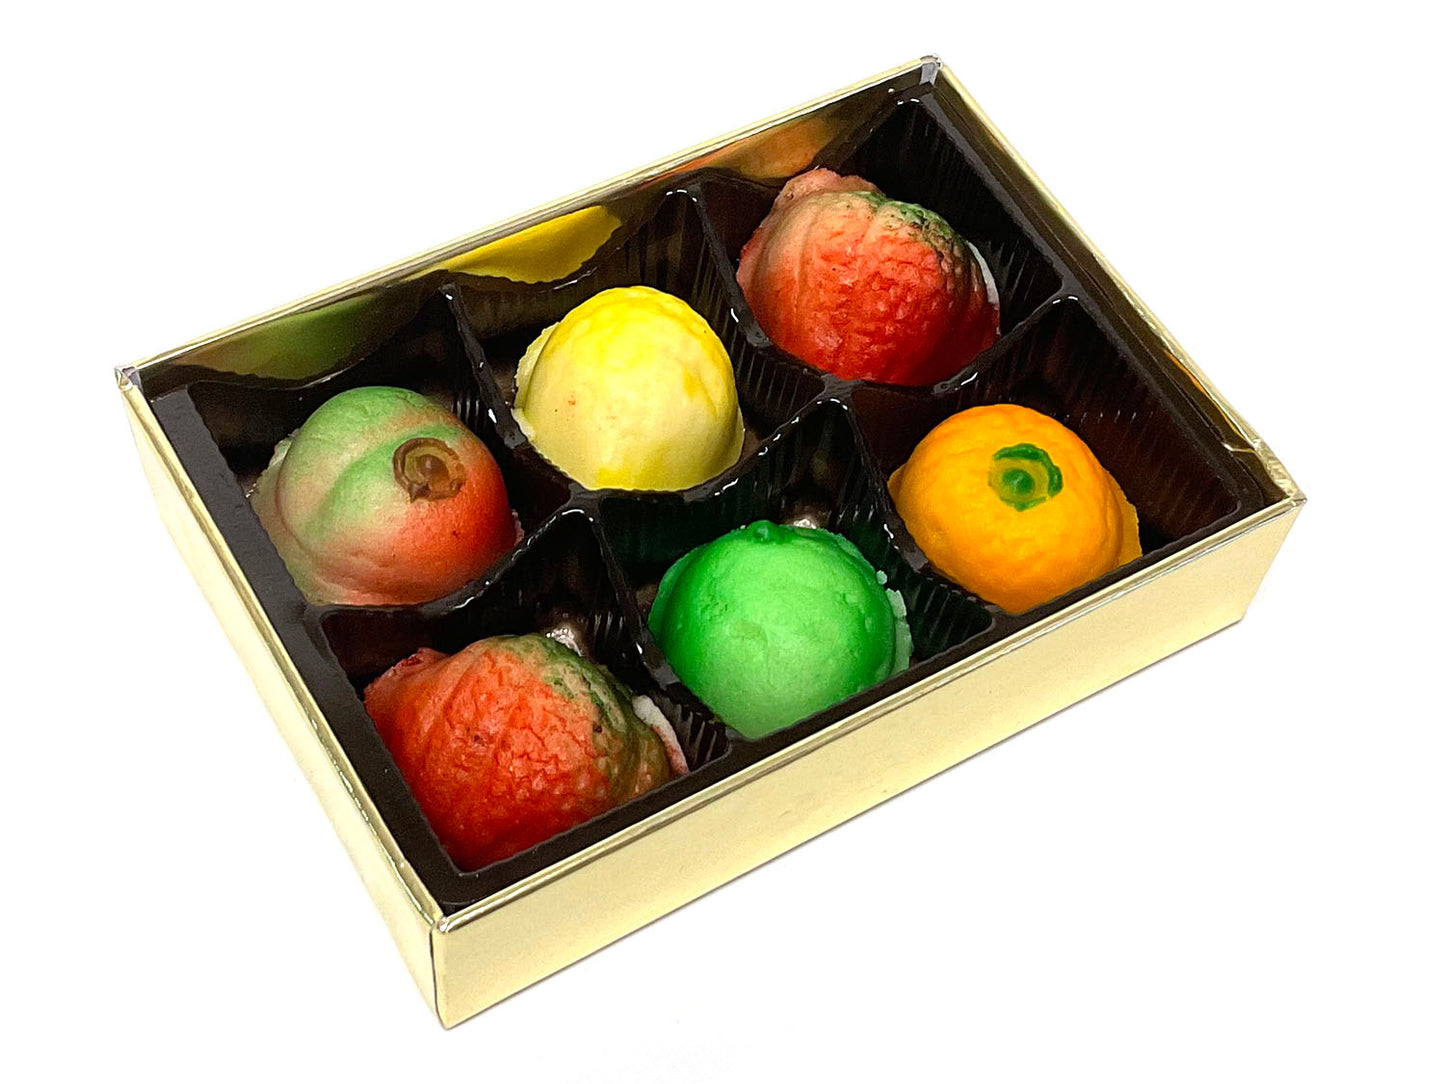 Marzipan Fruit Tray - without the box lid